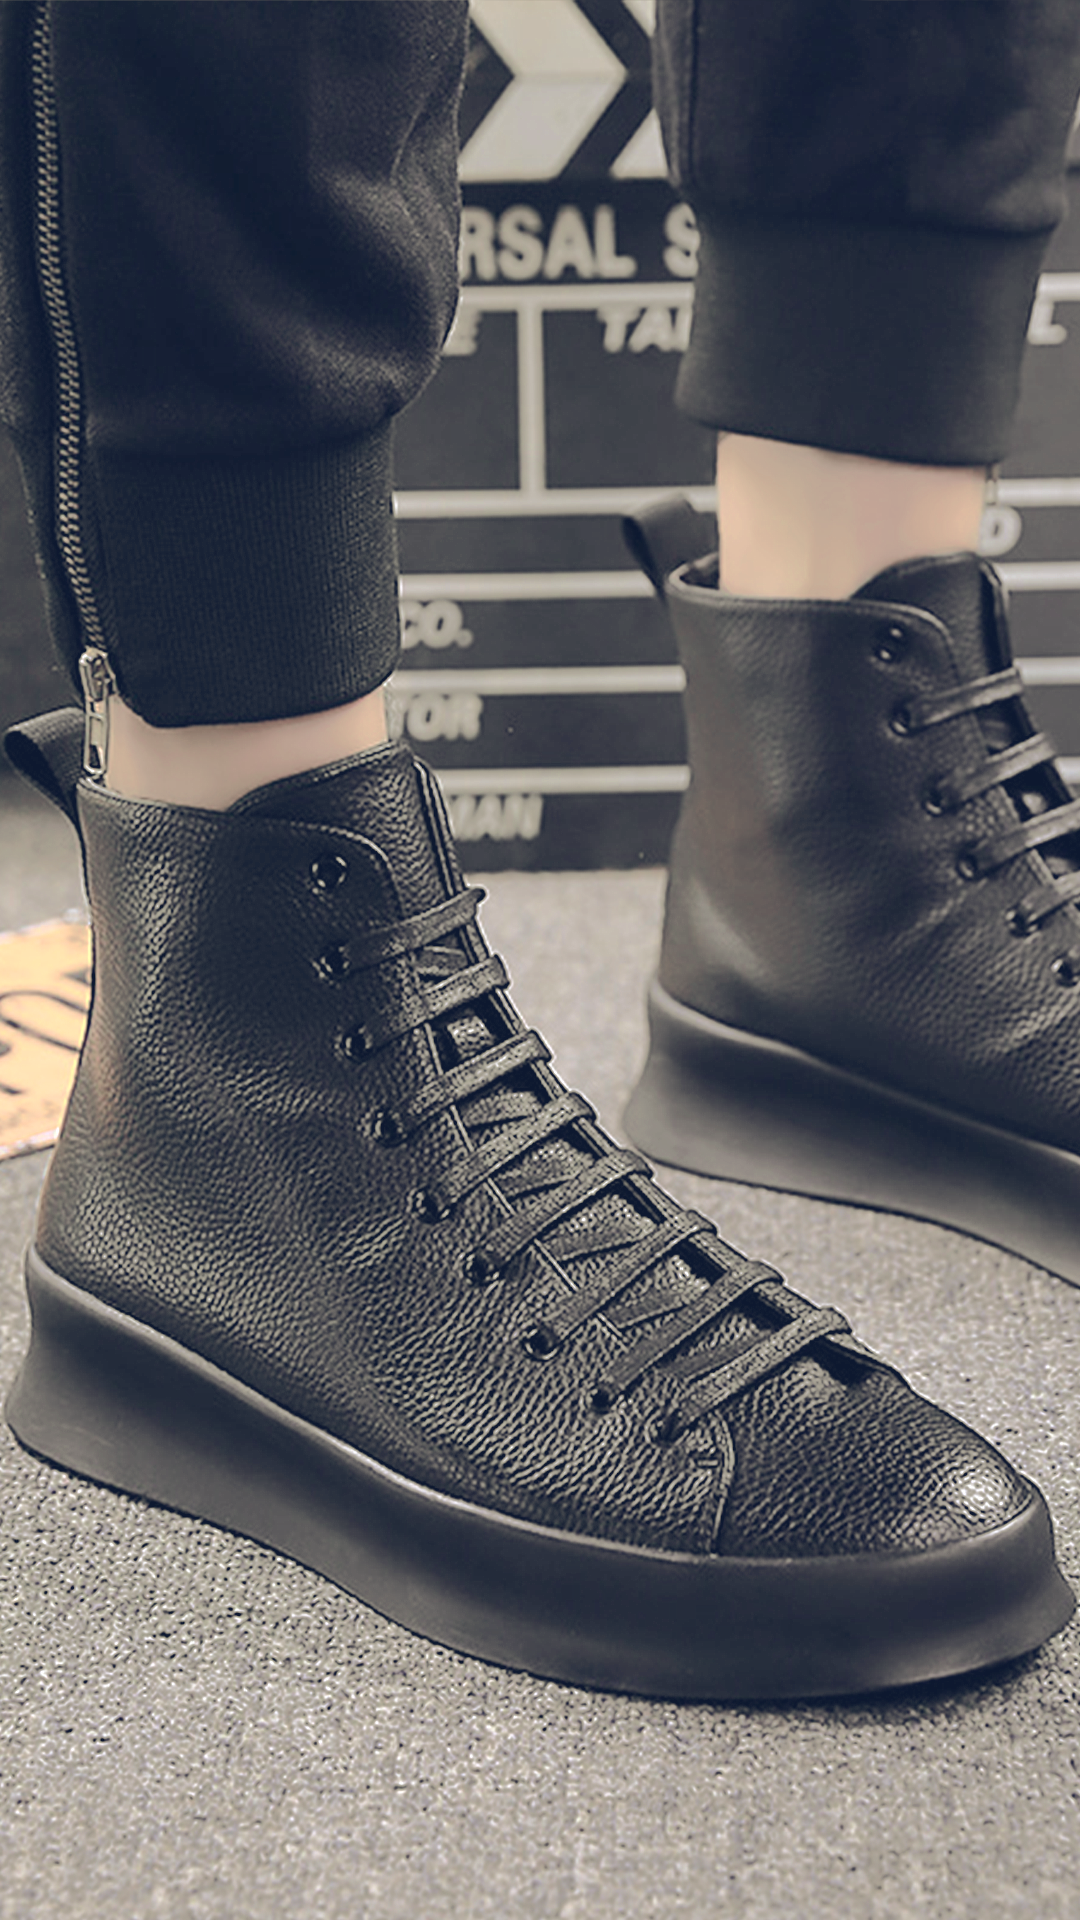 ♂♀High Cut Leather Shoes